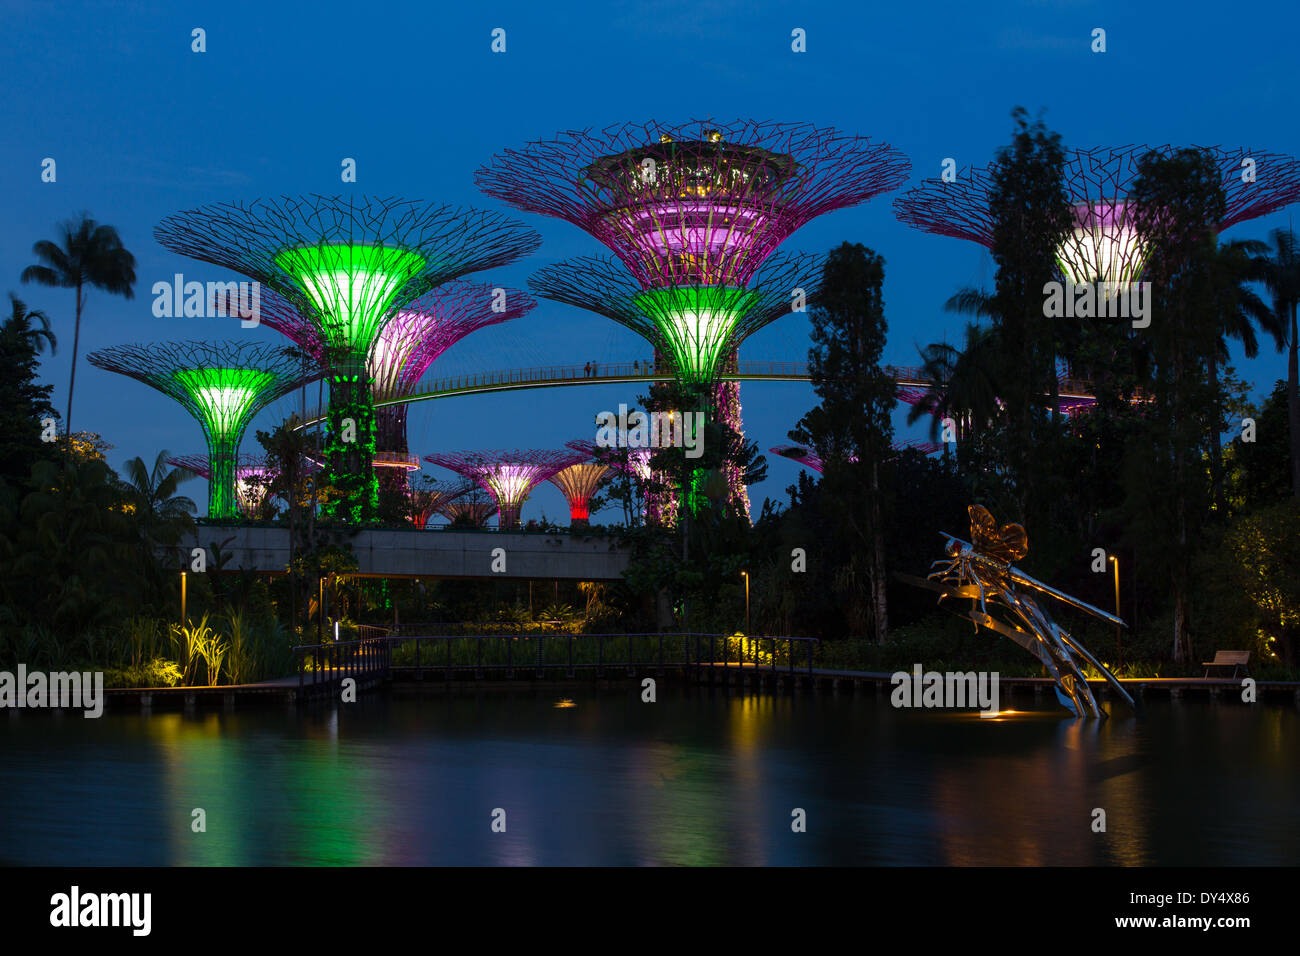 Gardens by the Bay - The park consists of three waterfront gardens: Bay South Garden, Bay East Garden and Bay Central Garden. Stock Photo